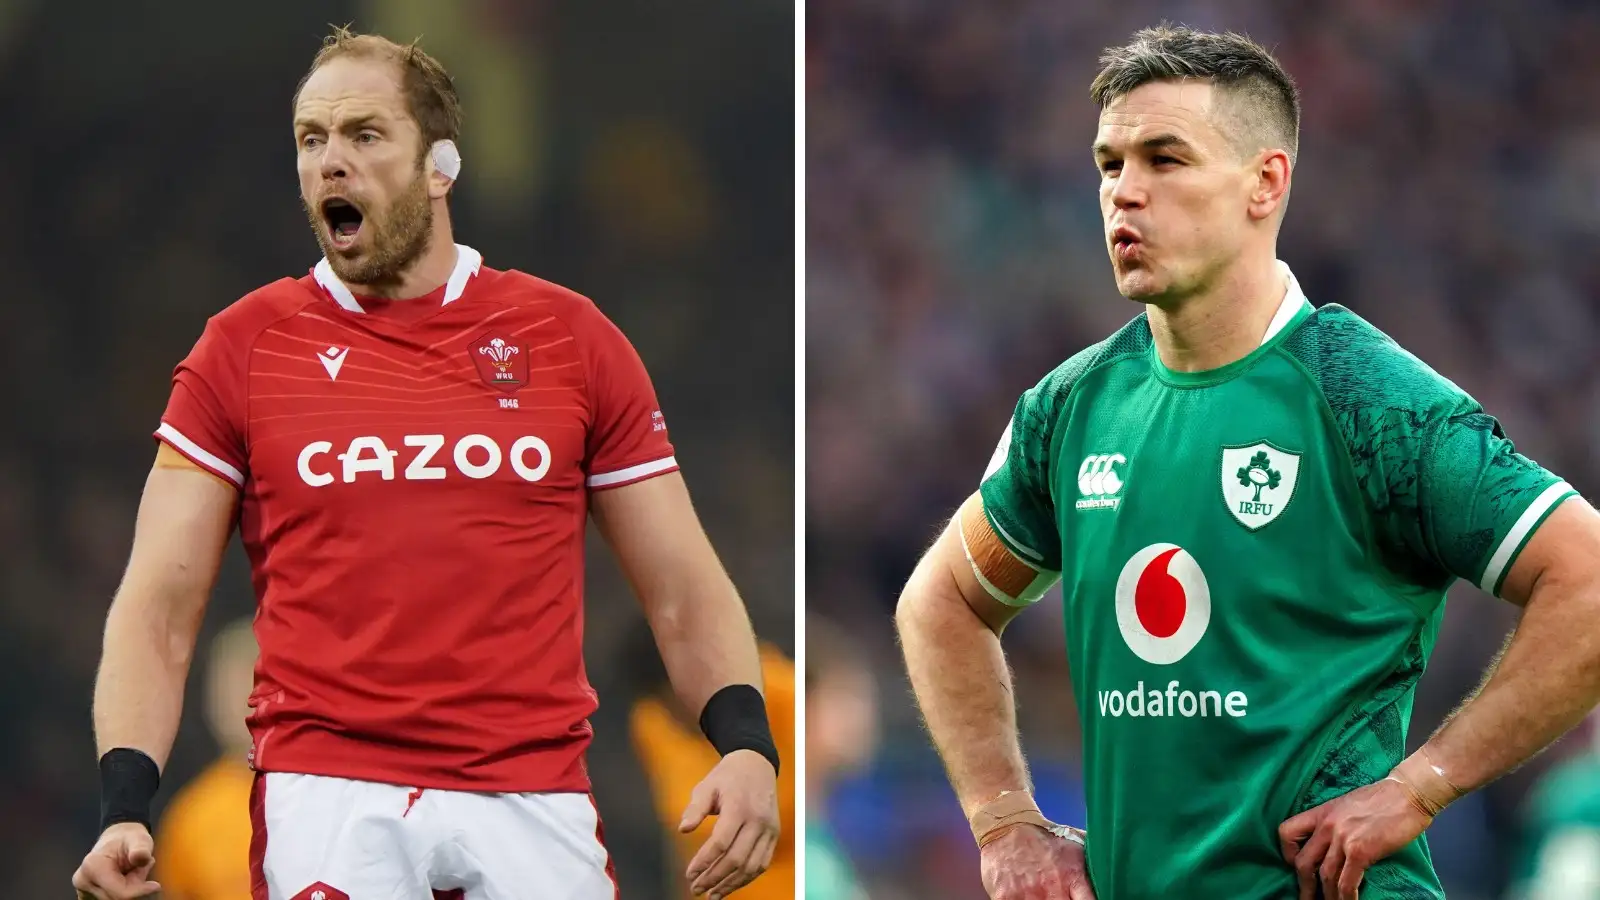 With this year’s Six Nations taking place in the same year as a Rugby World Cup, there are bound to be several players who feature in Rugby’s Greatest Championship for the final time. england ireland scotland wales italy france